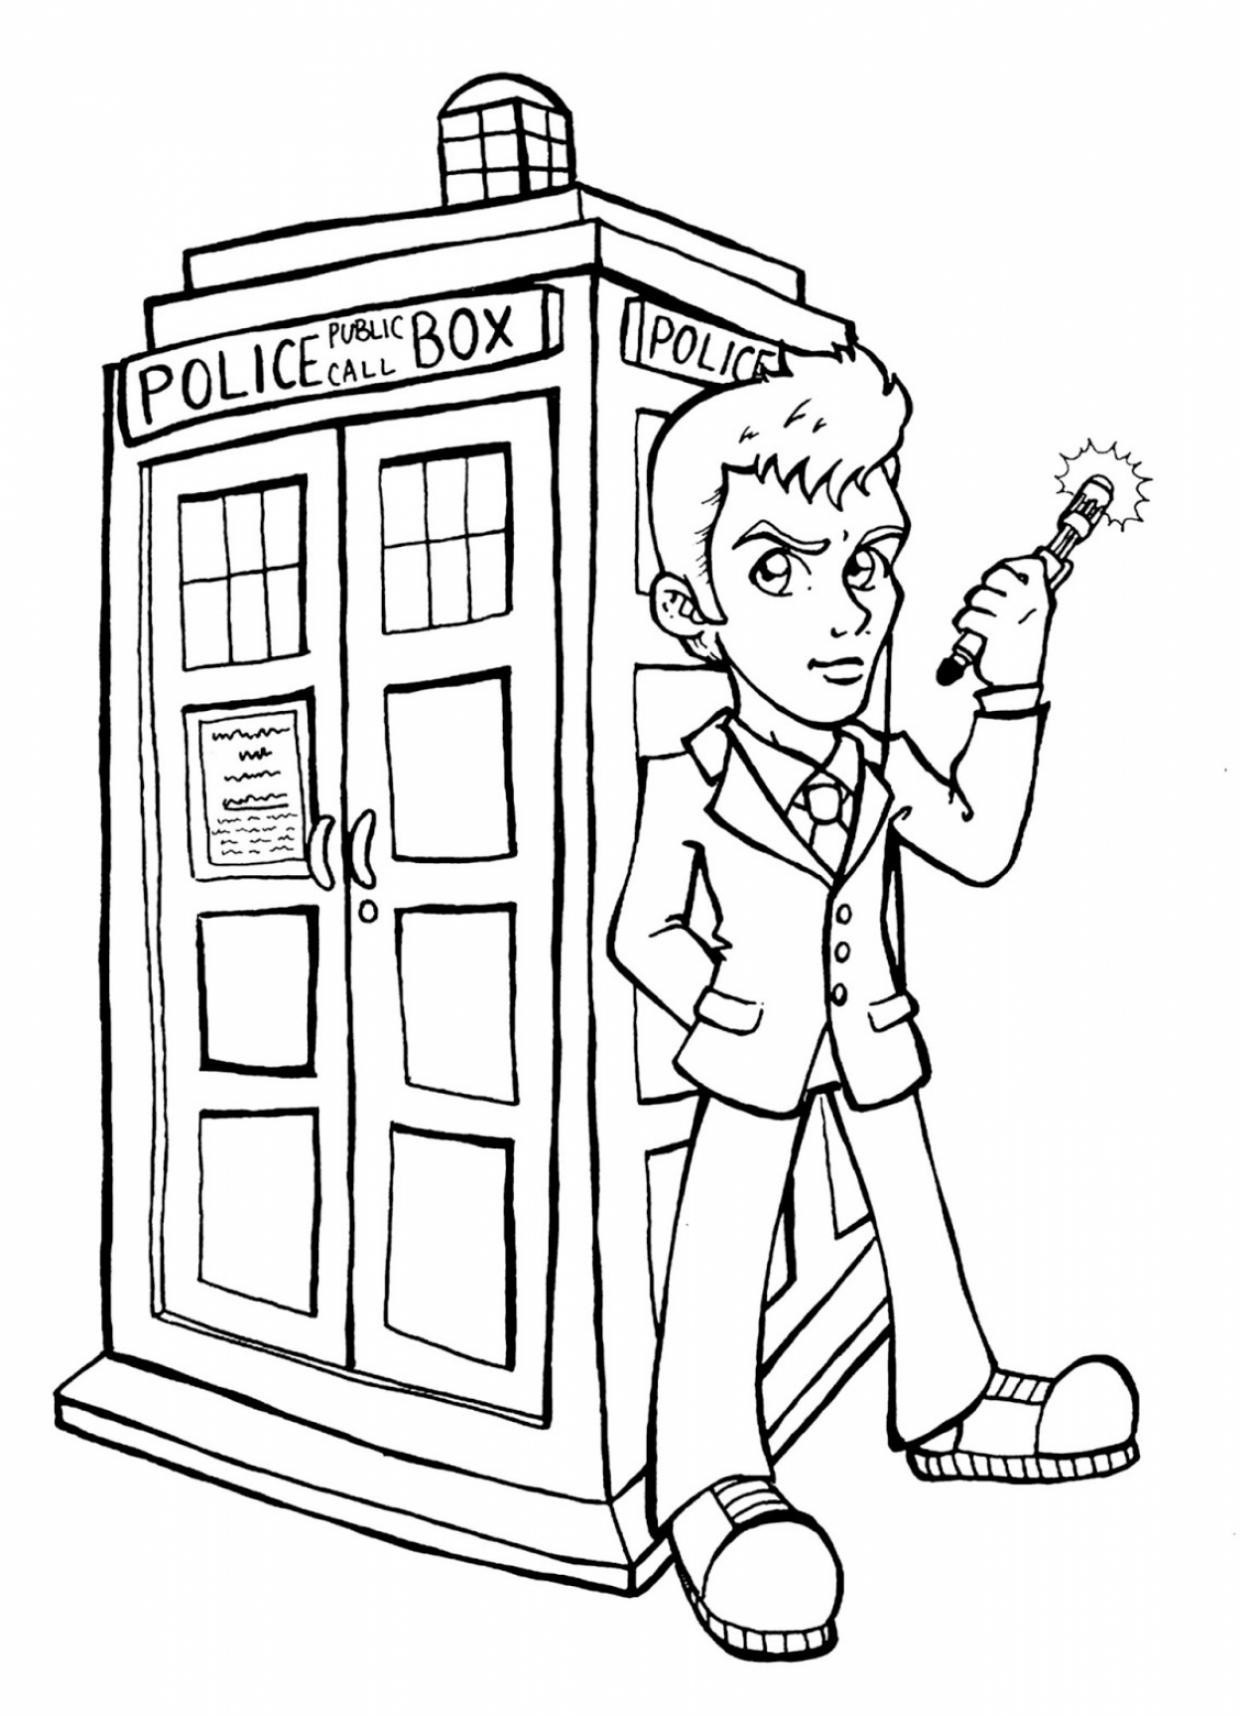 Doctor Who Coloring Pages - Best Coloring Pages For Kids